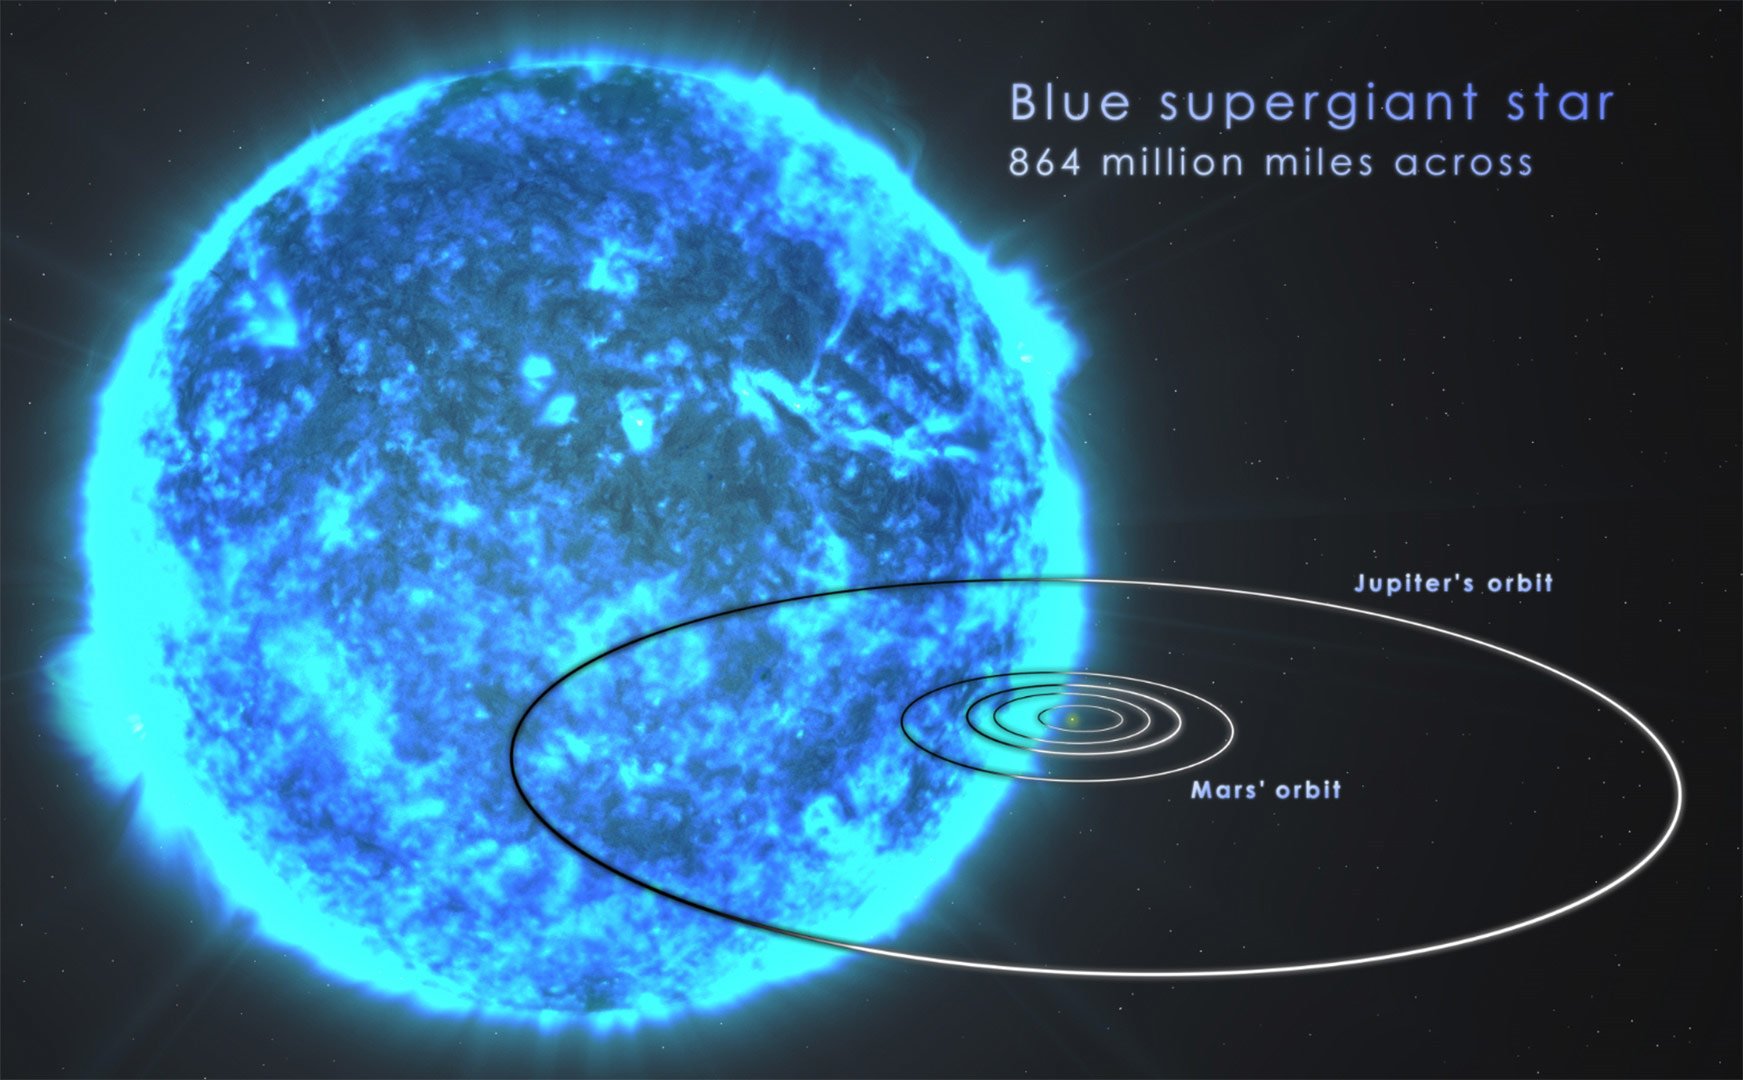 Blue-Supergiant-Star-the-Most-Likely-Source-of-Ultra-Long-Gamma-Ray-Bursts-like-GRB-130925A.jpg